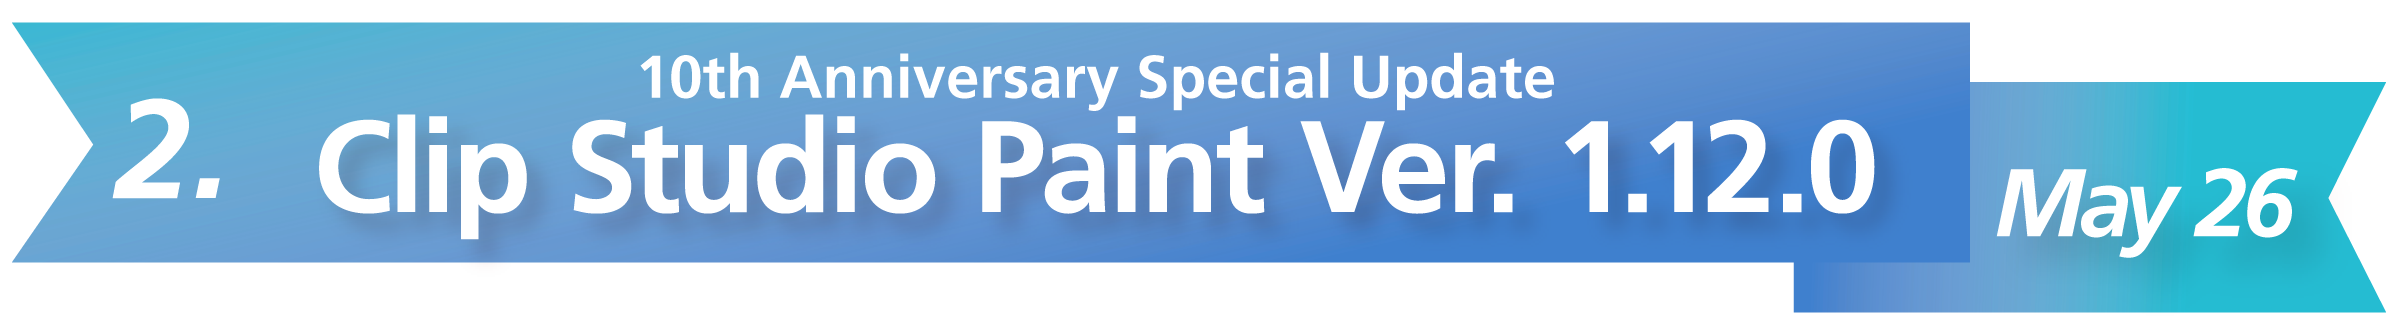 2. 10th Anniversary Special Update Clip Studio Paint Ver. 1.12.0 May 26